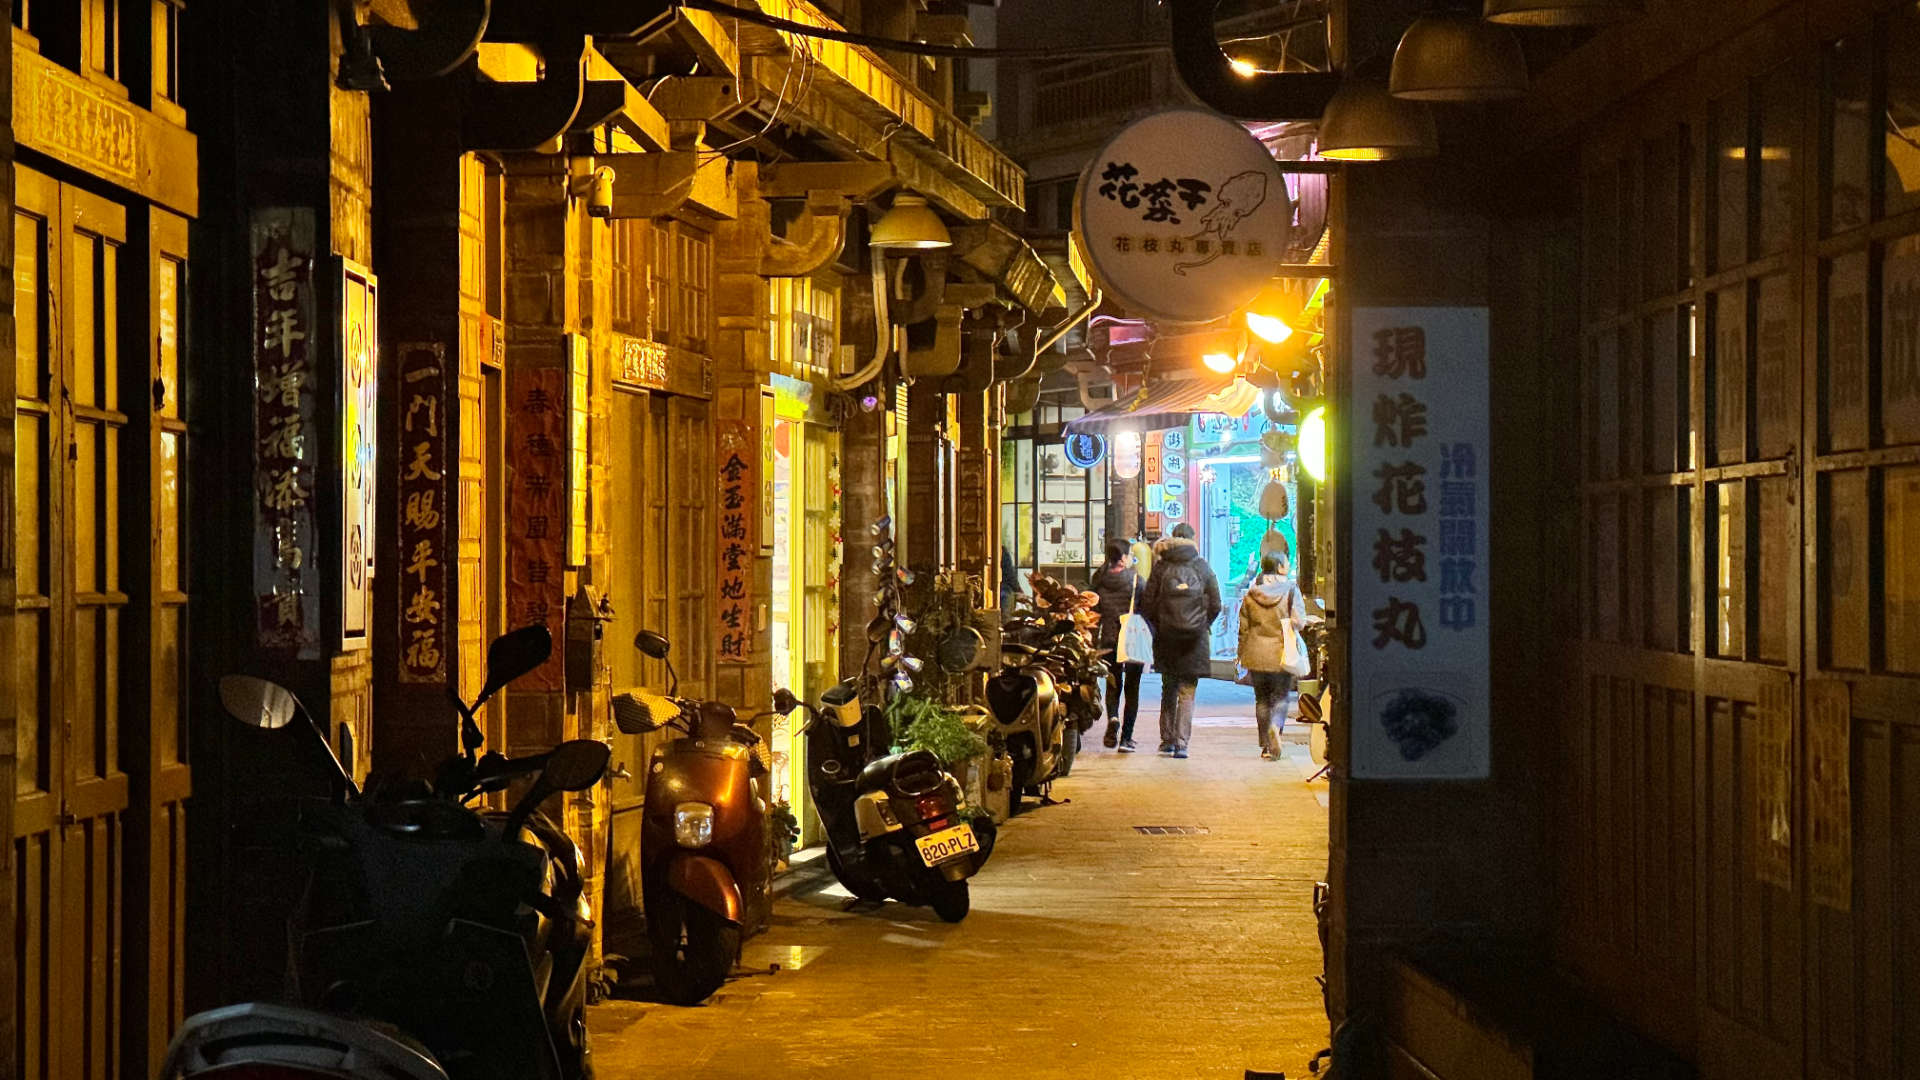 Three people walk along Zhongyang Old Street at night. There are traditional wooden buildings on either side of the narrow street.